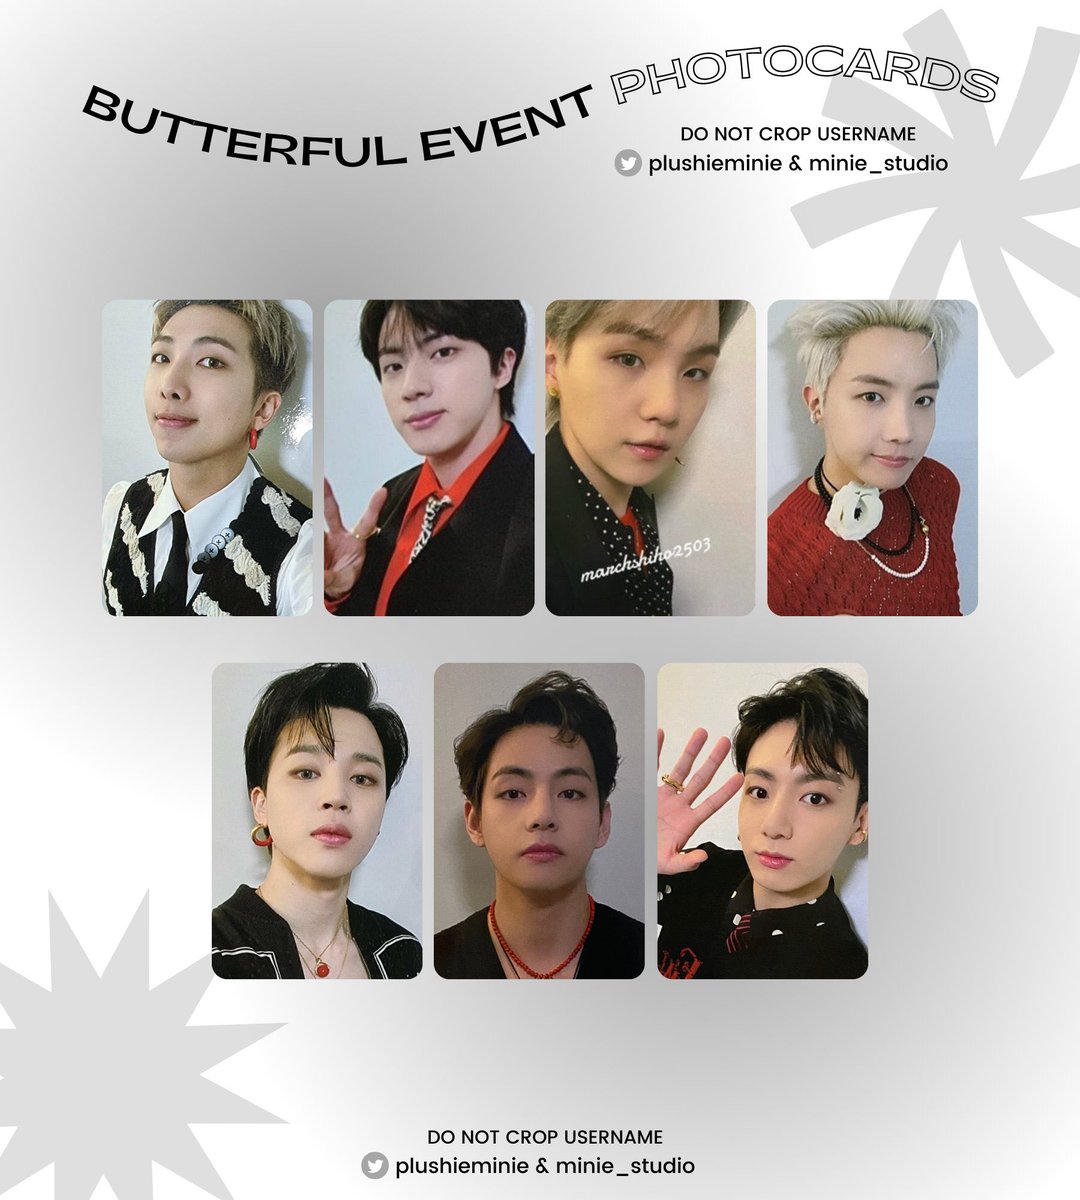 Карта чонгука butterfly lucky event. Butterful Lucky draw event от Jungkook фотокарточка. Чонгук Butterful Lucky event. Чонгук Butterful Lucky draw event.